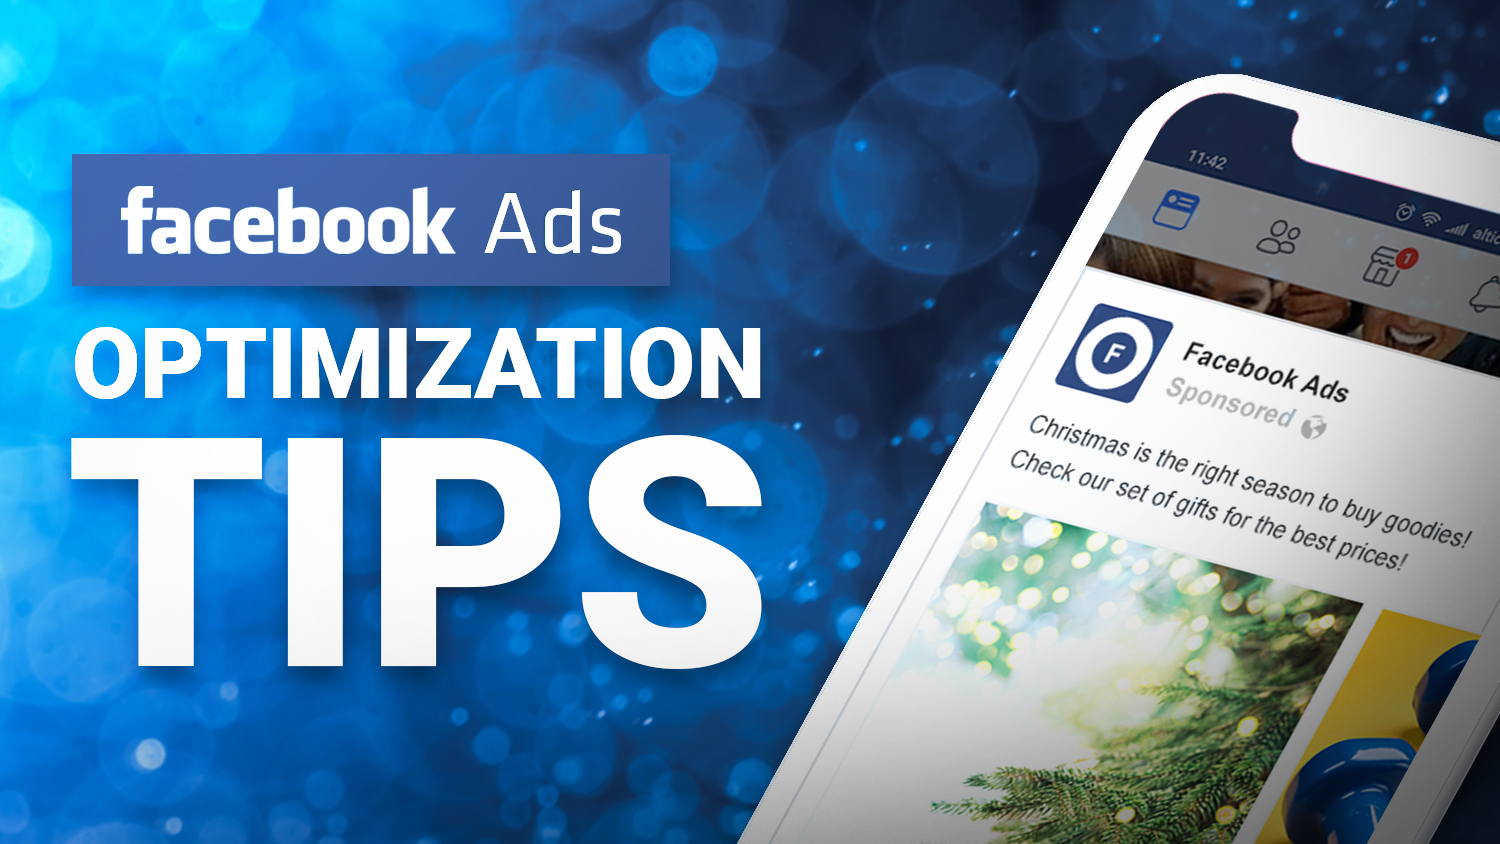 Profitable Facebook Ads System: Learn The Strategies to Running High Converting Facebook & Instagram Ads Without Getting Banned or Restricted.